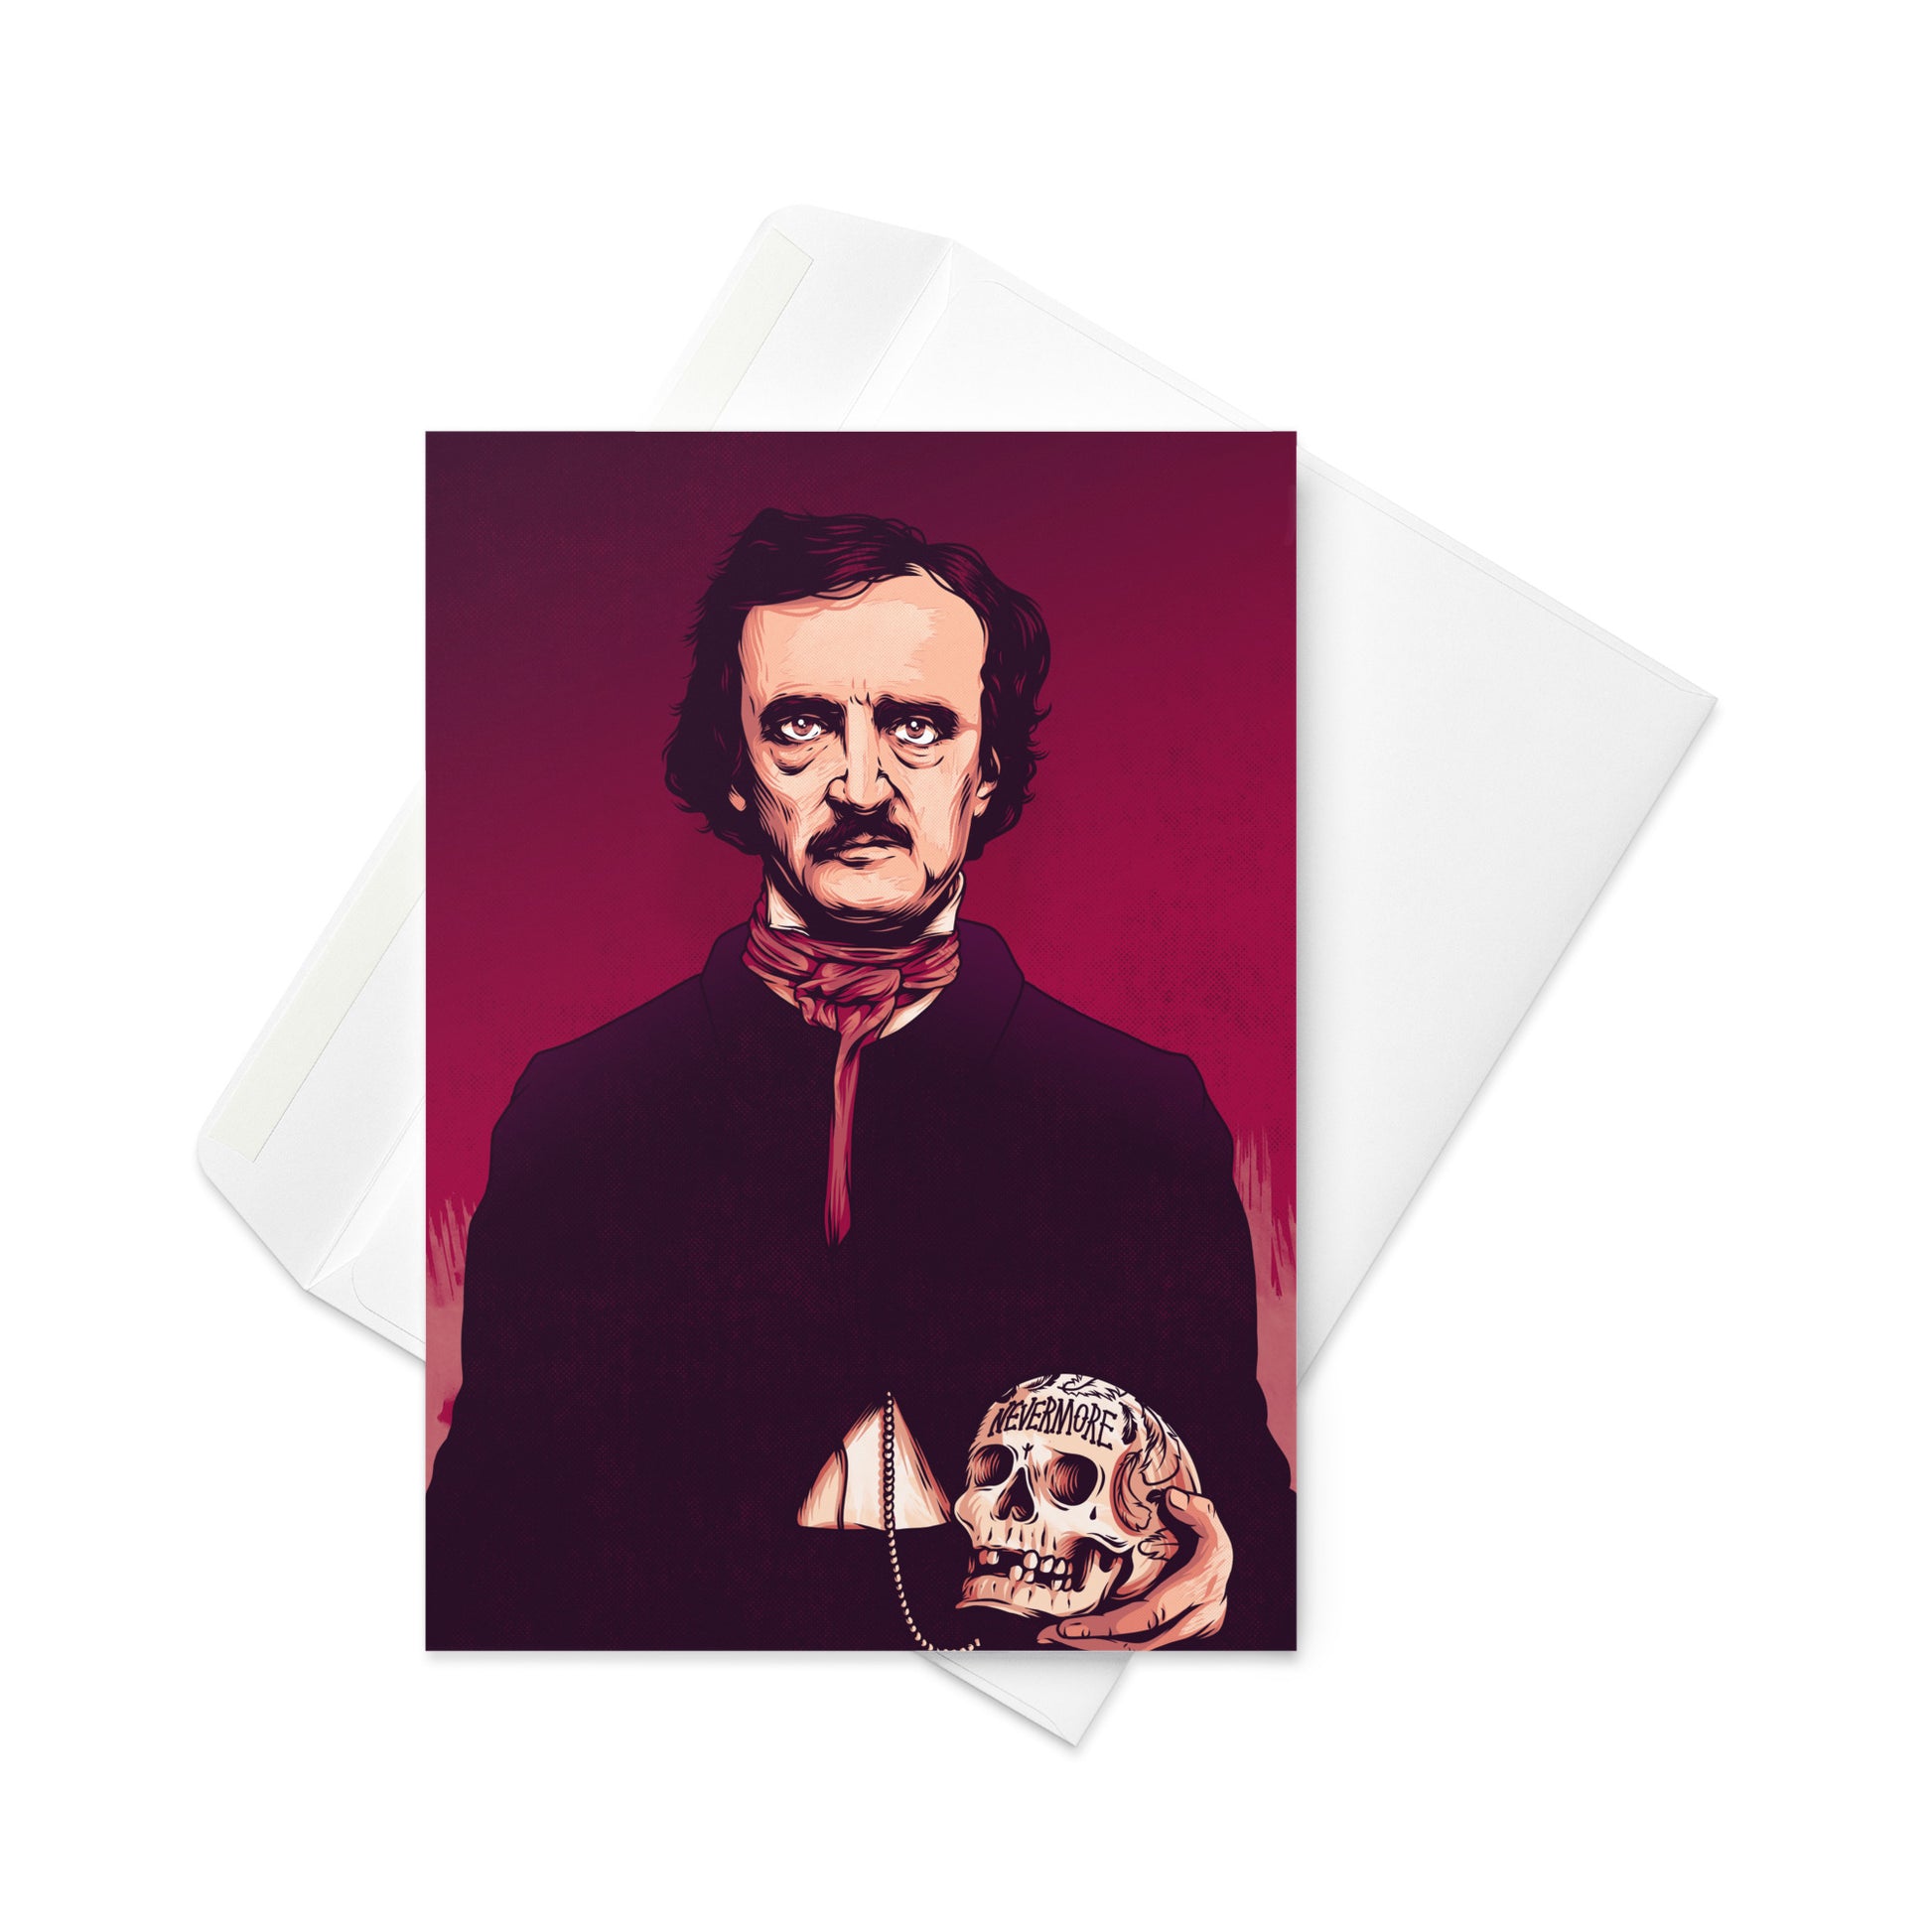 Edgar Allan Poe Illustrated Greeting Card with Raven and Skull Design - 5x7